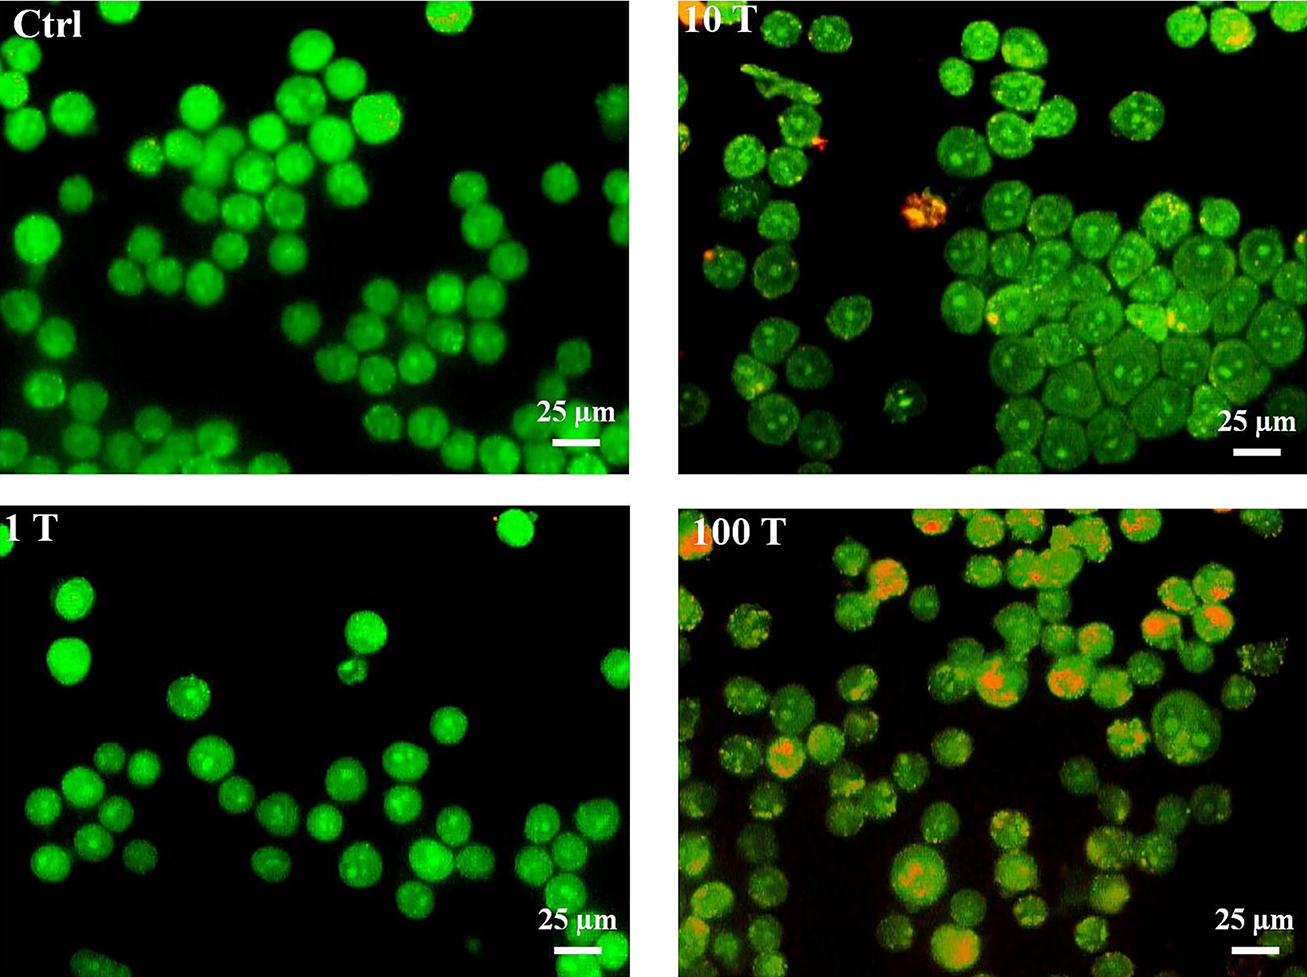 Effects of TiO2 NPs on detection of acidic vesicular organelles and autophagy in A375 cells. Cells were treated with different concentrations of NPs (1, 10 and 100 μg/mL), then harvested and stained with AO for 24 hours. The content of acidic vacuoles (red dots) was evaluated by fluorescence microscopy (magnification 32X).